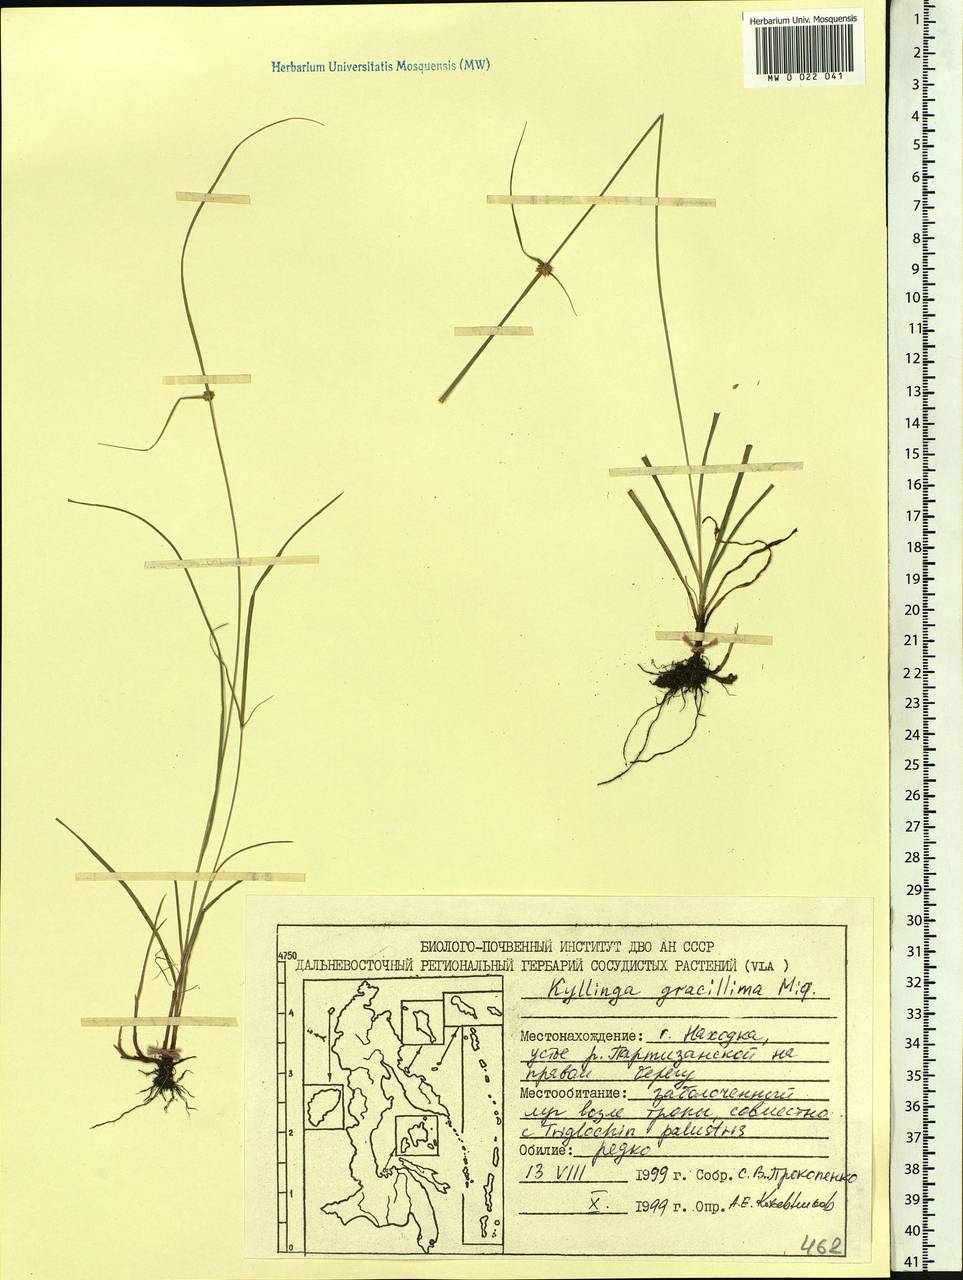 Cyperus brevifolioides Thieret & Delahouss., Siberia, Russian Far East (S6) (Russia)